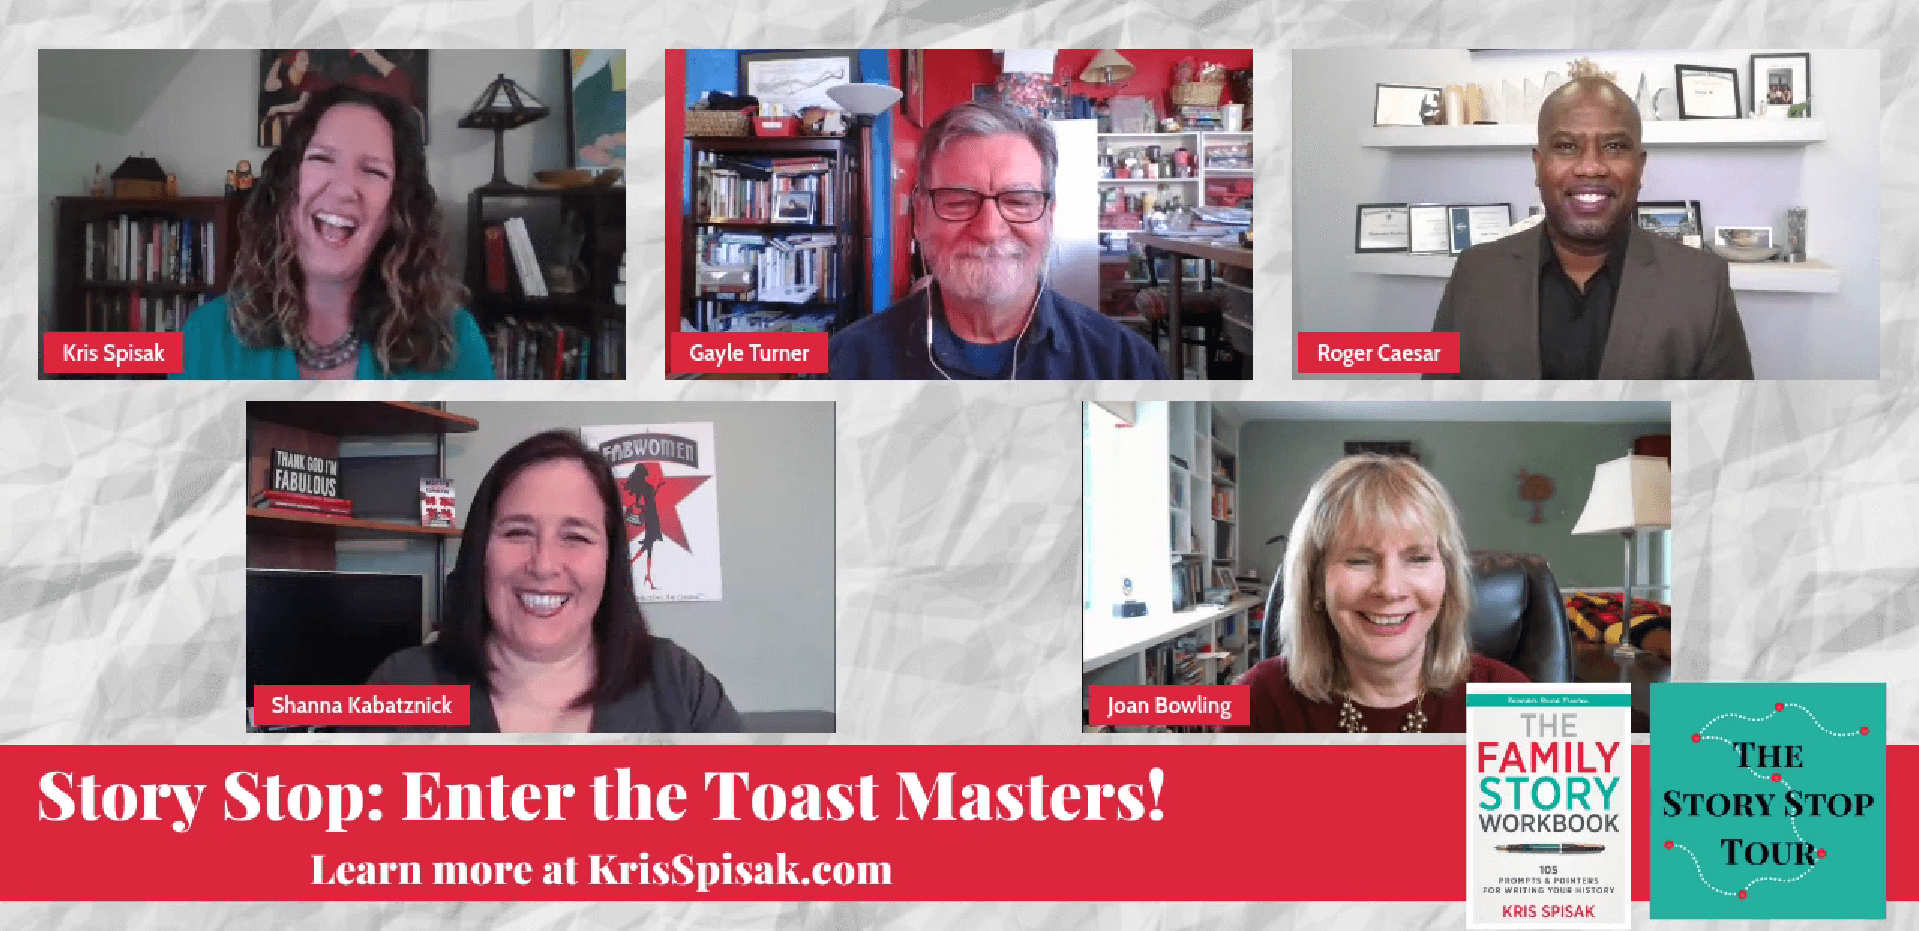 Story Stop - Enter the Toastmasters with Kris Spisak